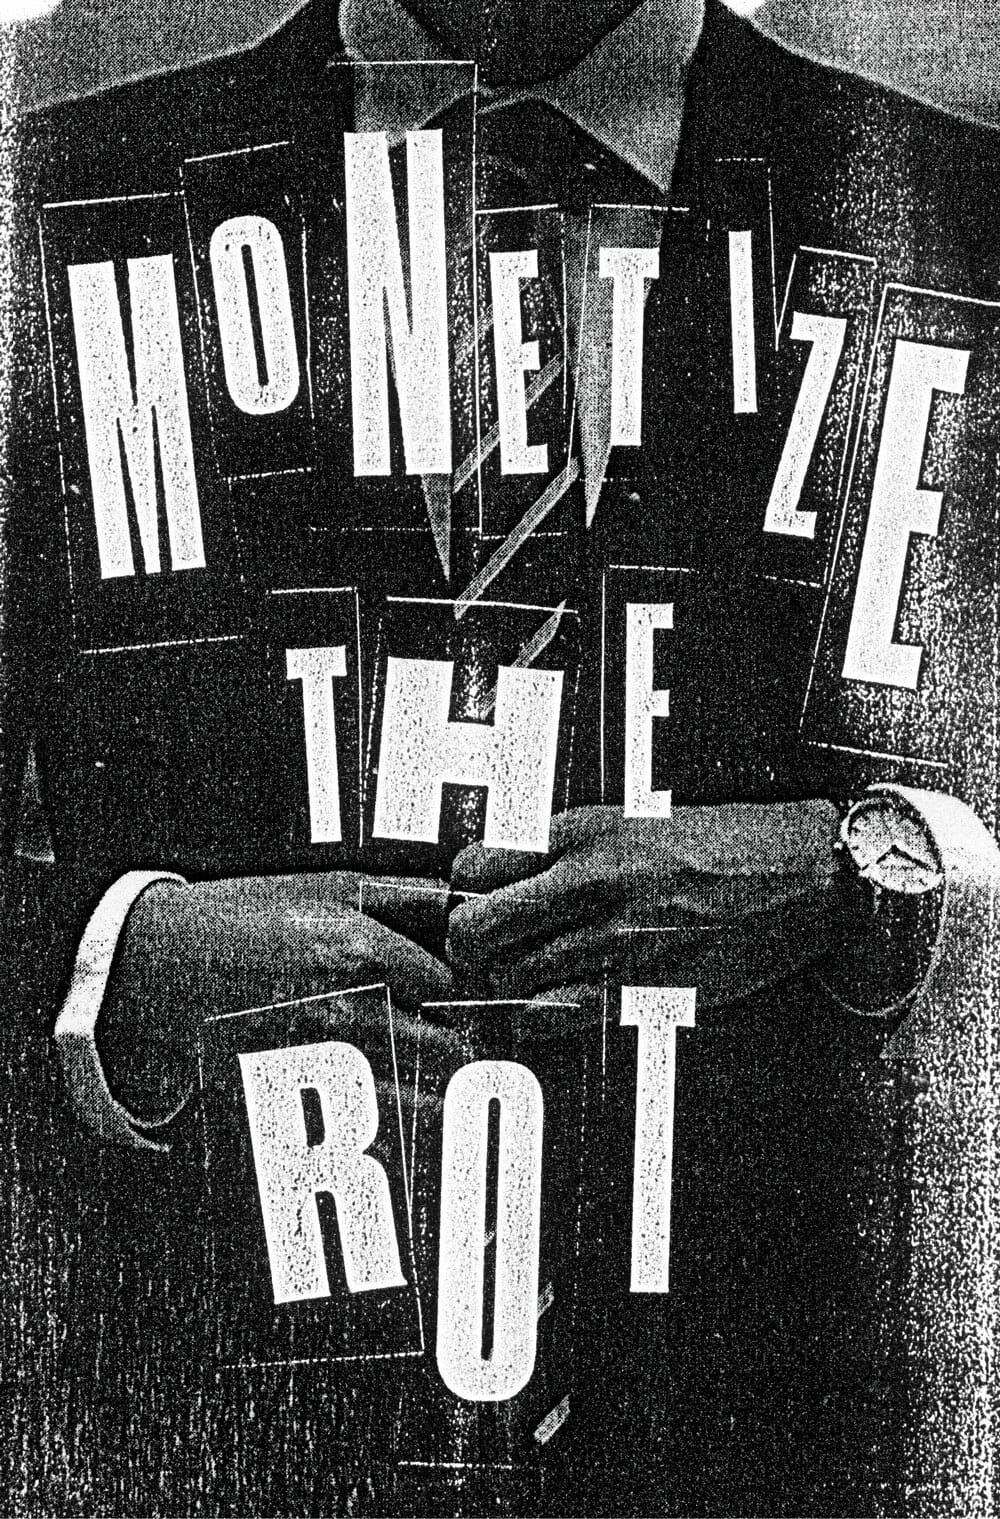 The words “MONETIZE THE ROT” are superimposed on top of a photocopy of a stylish looking man.